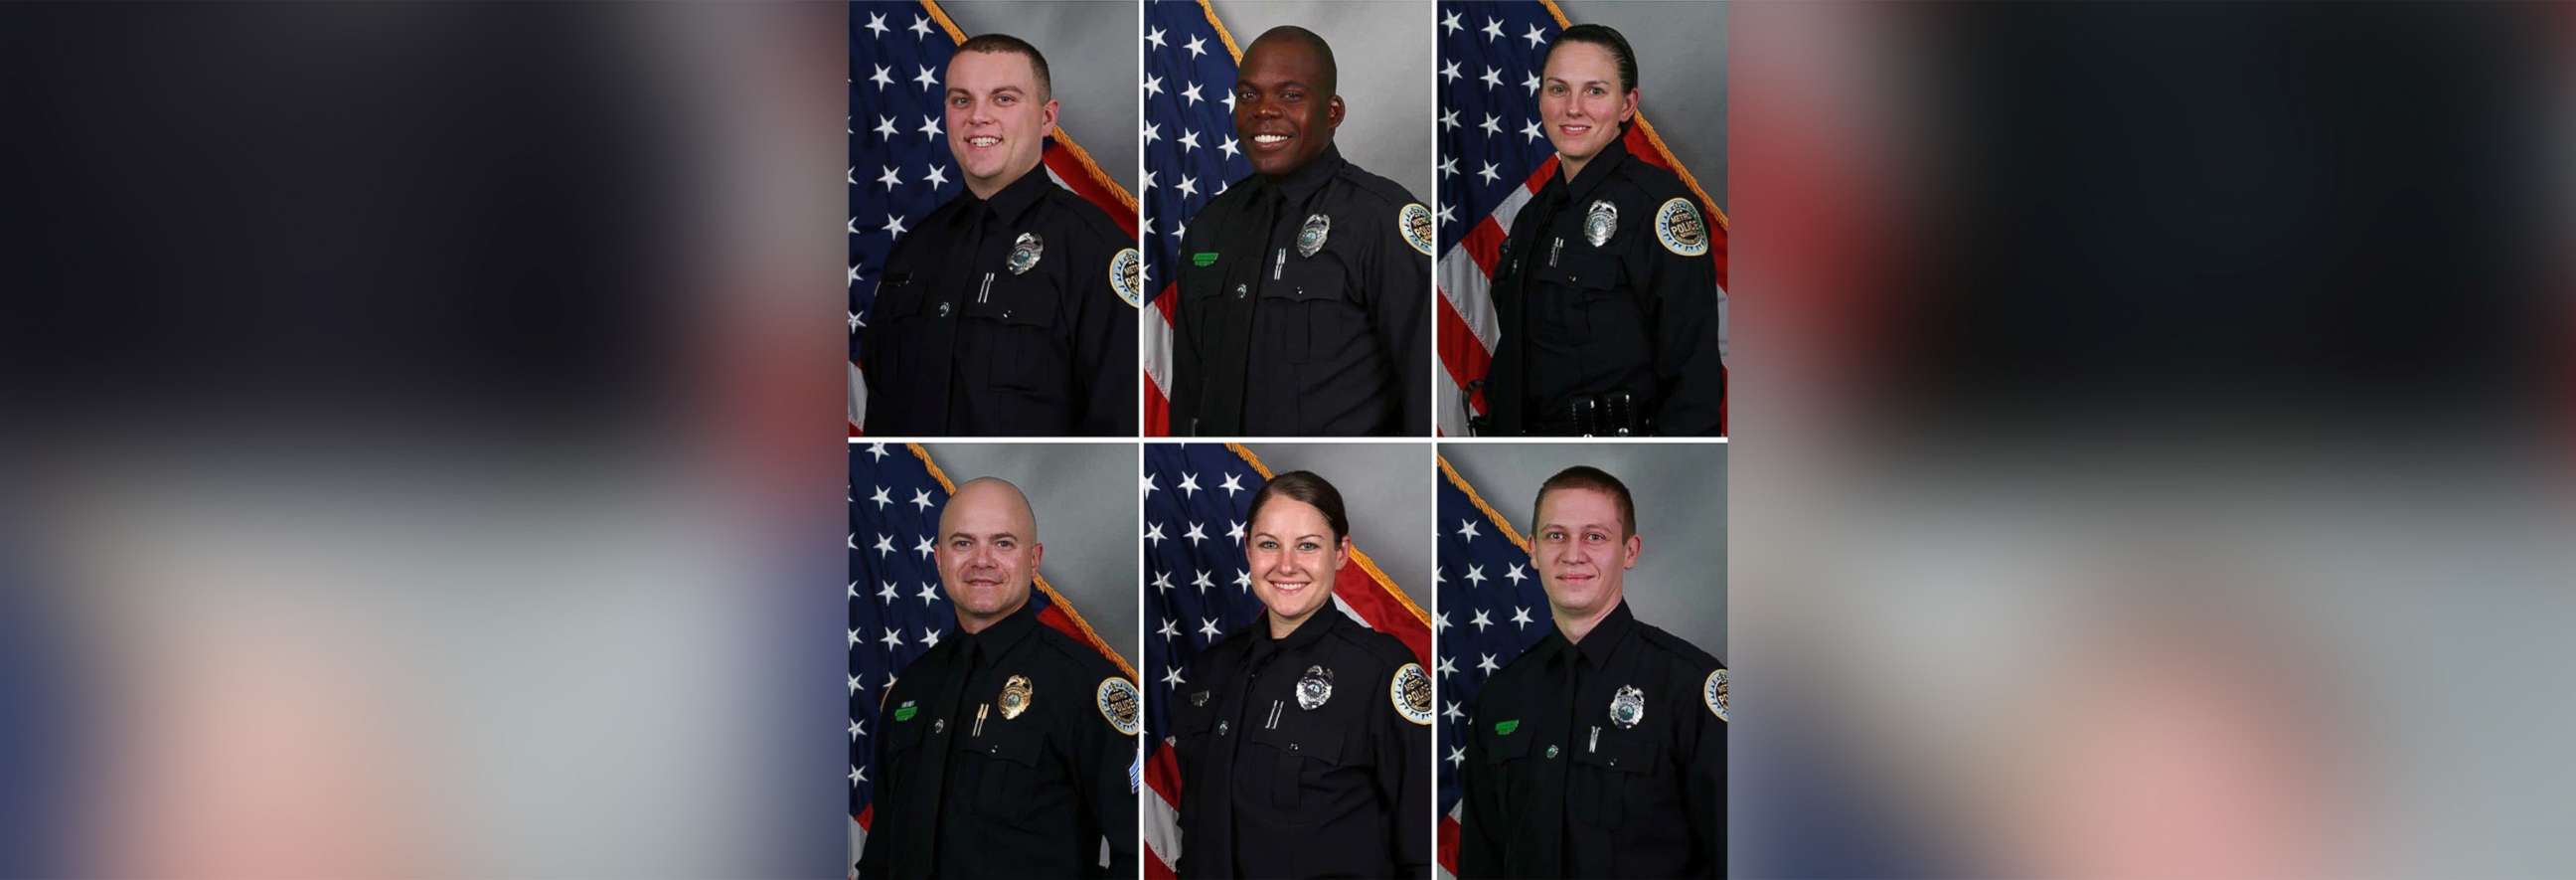 PHOTO:  Nashville police identified six officers who helped evacuate the area before an explosion on Dec. 25 (clockwise from top left):Michael Sipos, James Wells, Amanda Topping, James Luellen, Brenna Hosey, and Timothy Miller.